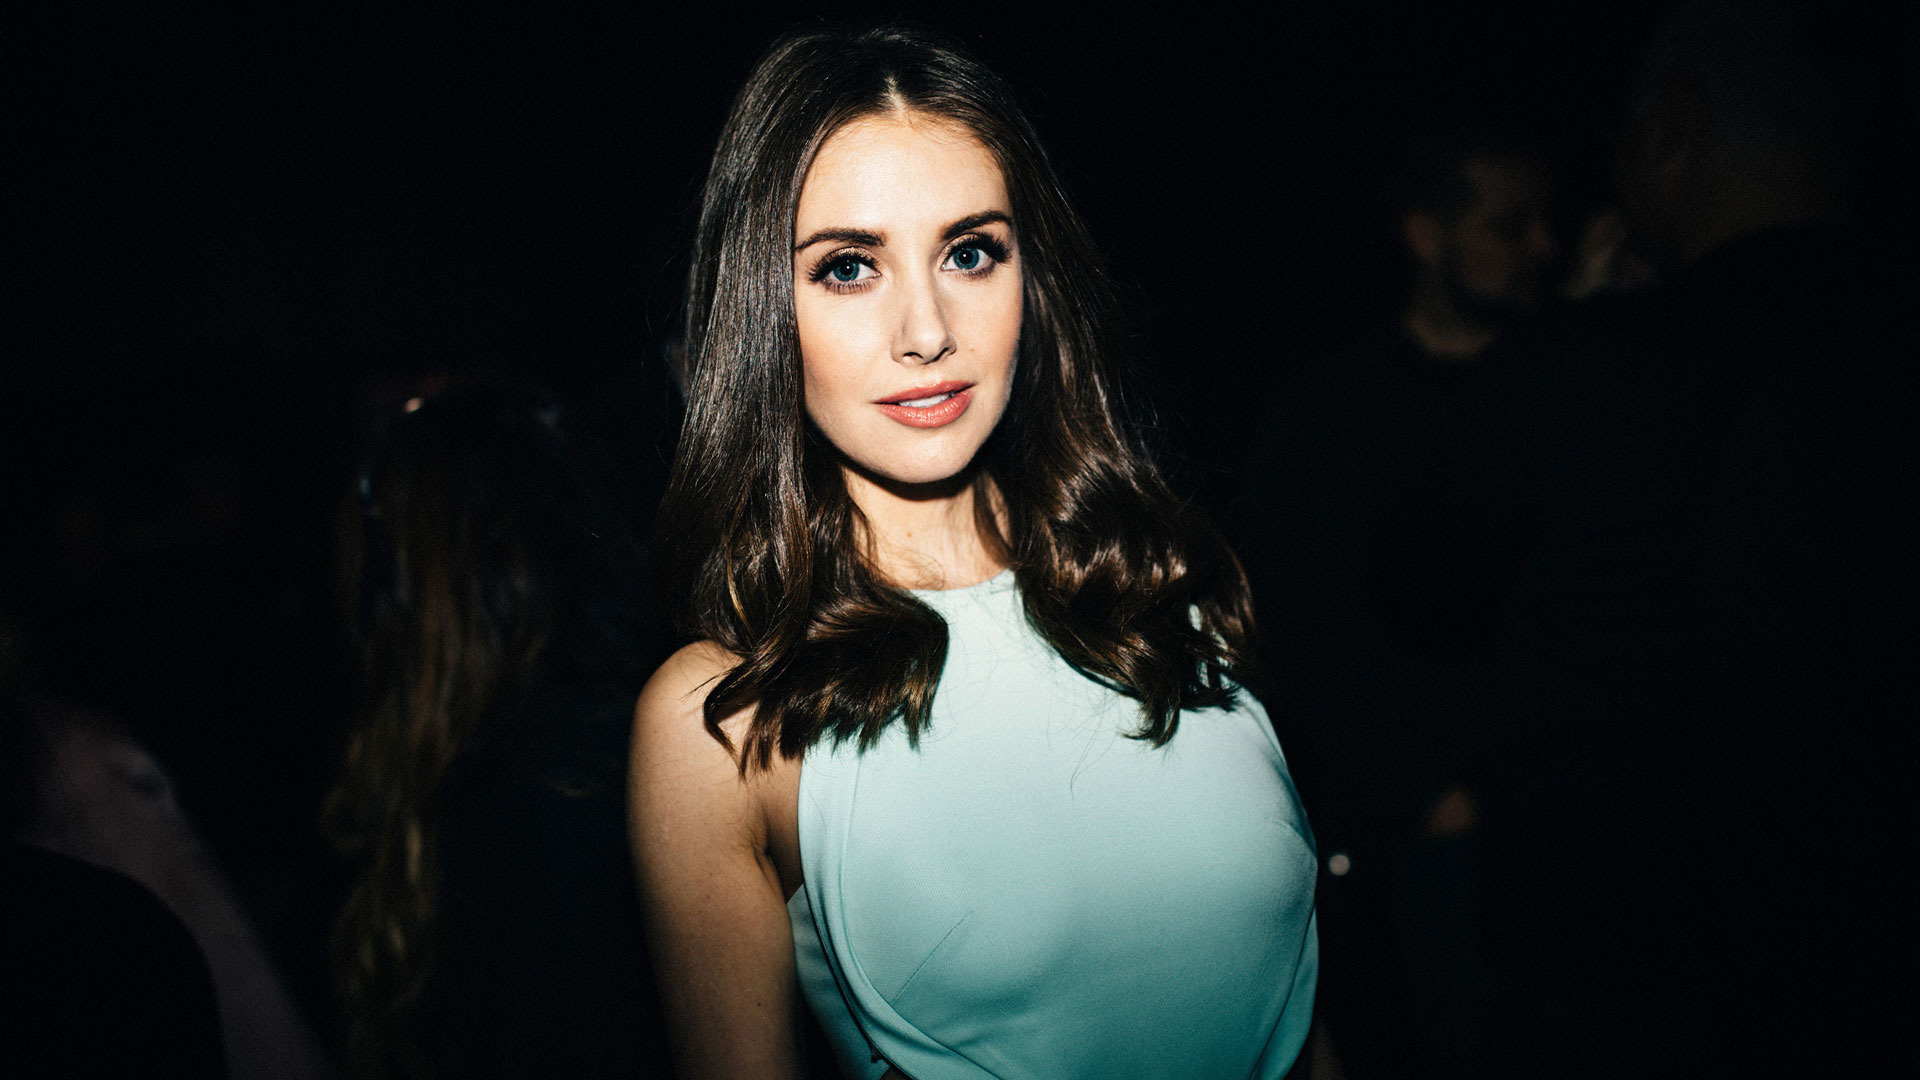 December 29, 1982: Golden Globe and SAG Nominee Alison Brie Was Born